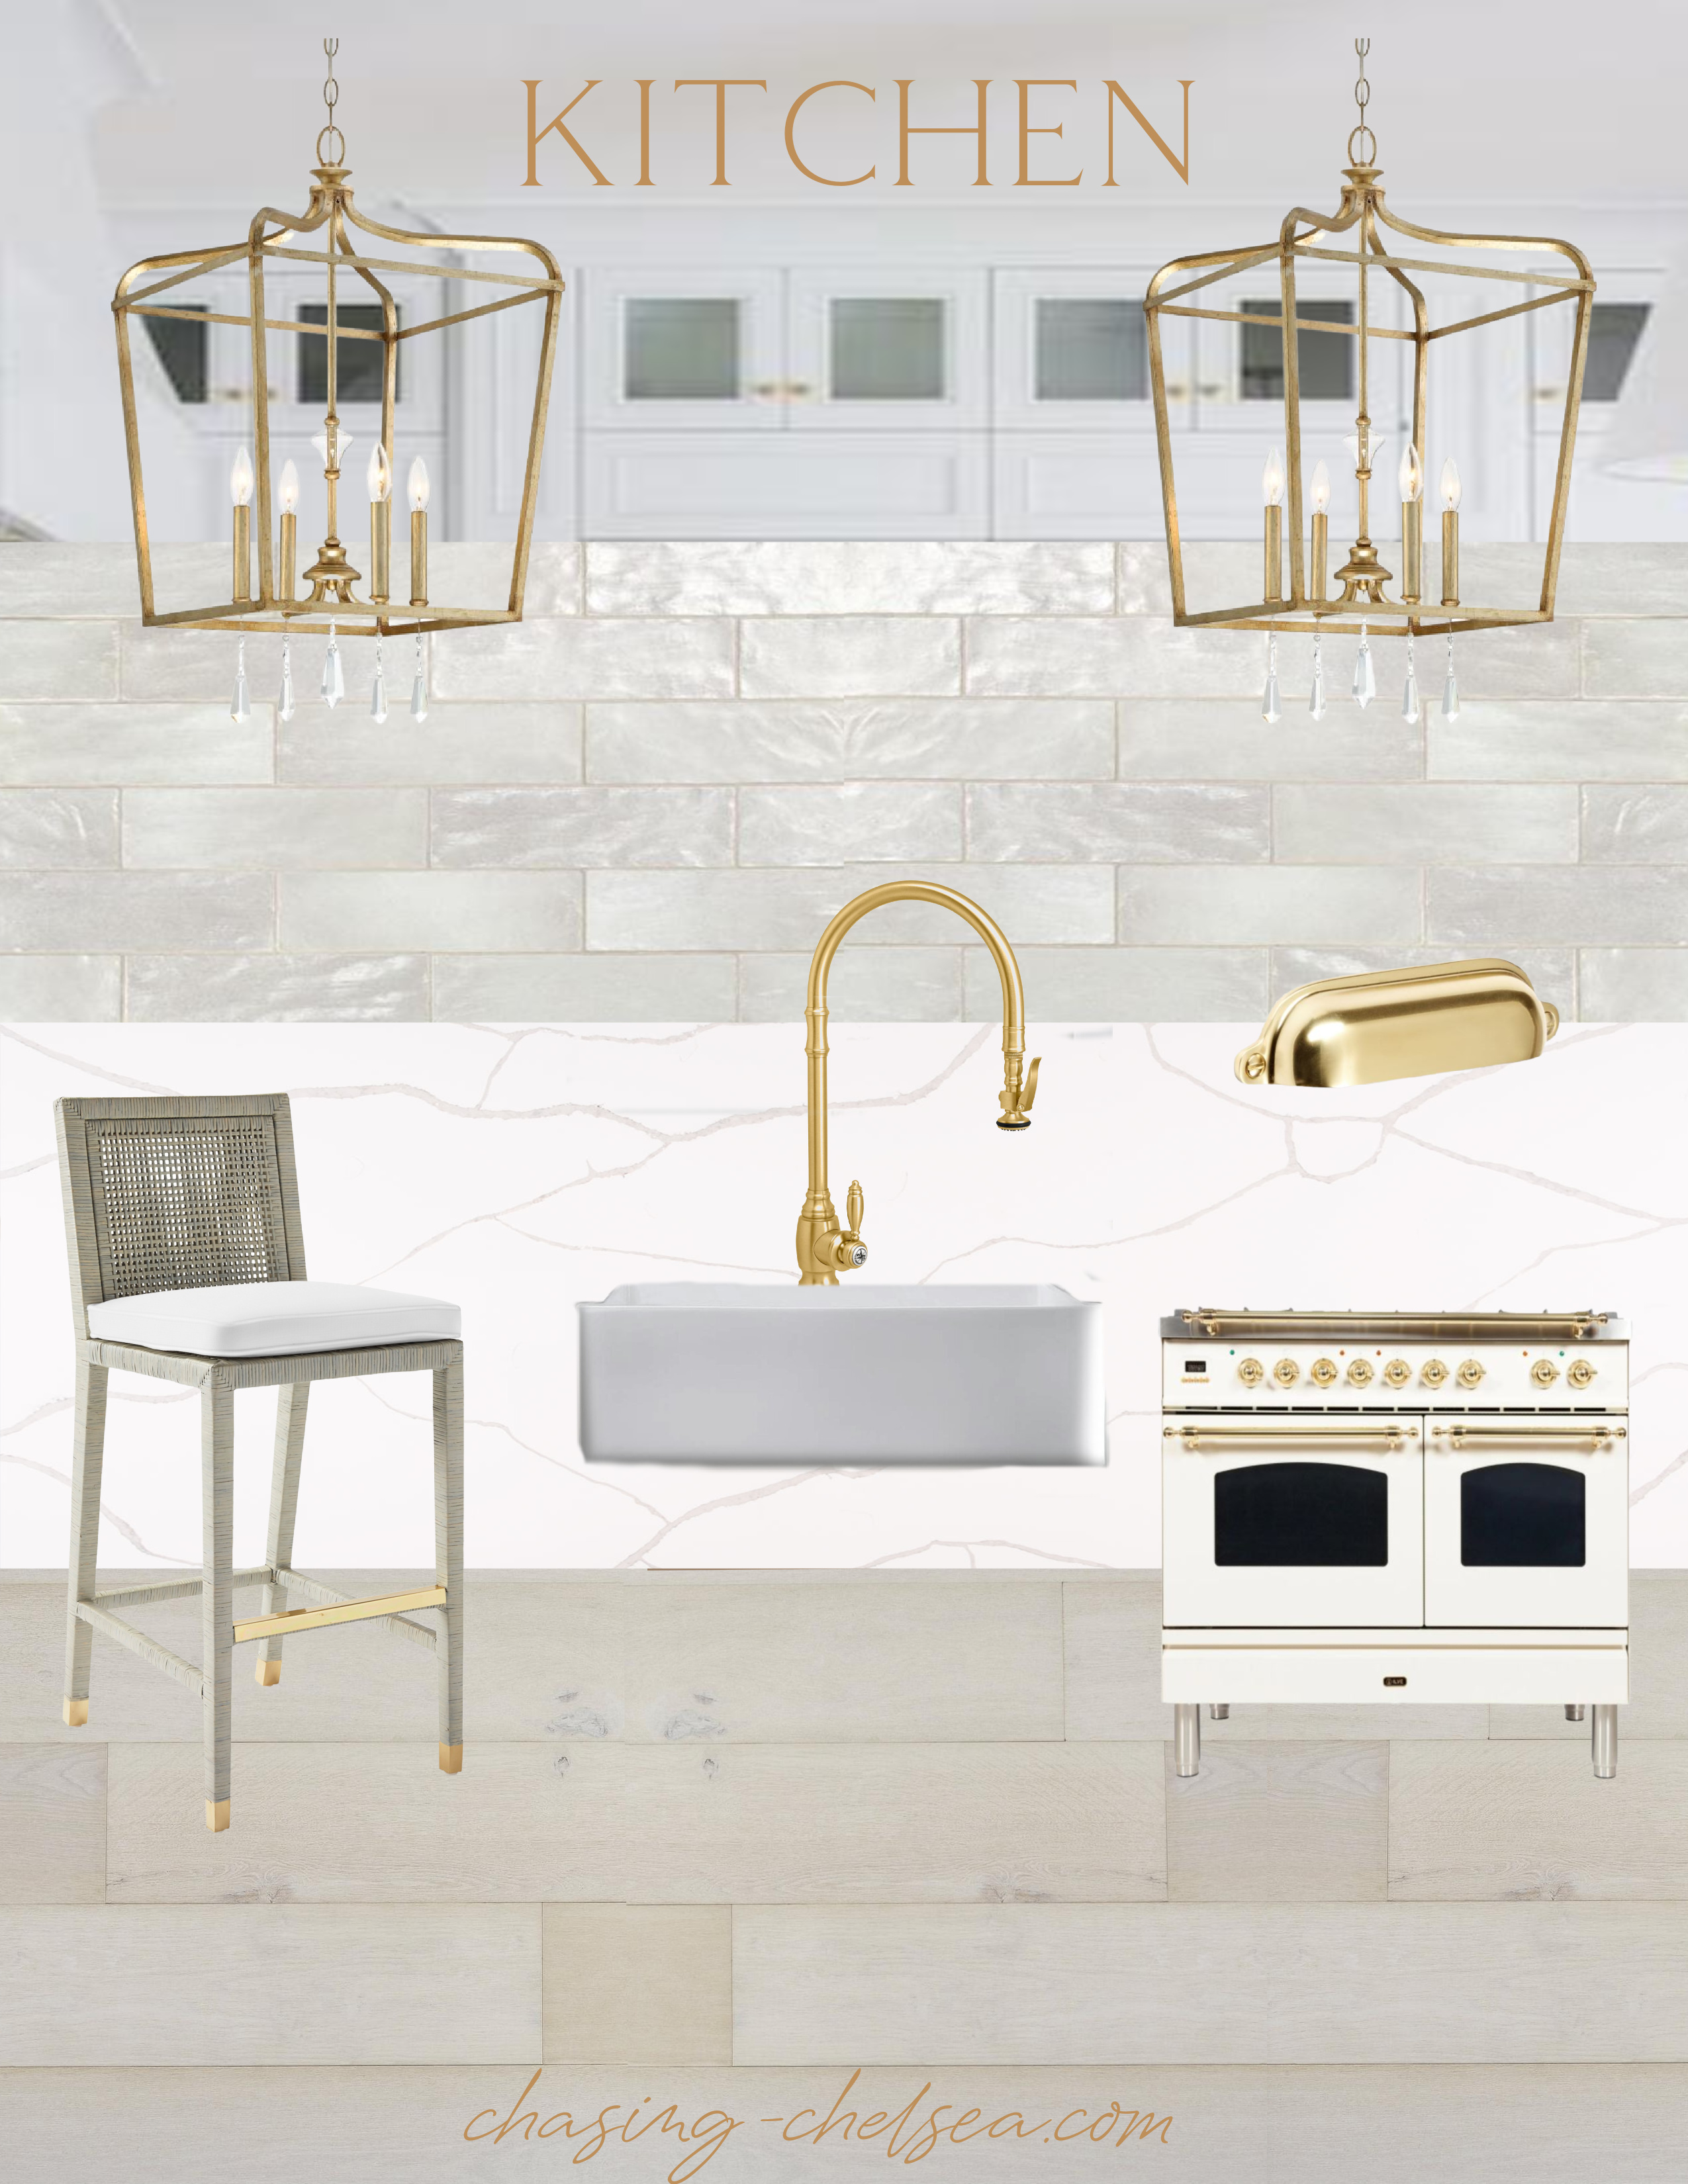 Our Dream White & Gold Kitchen Brought to Life!